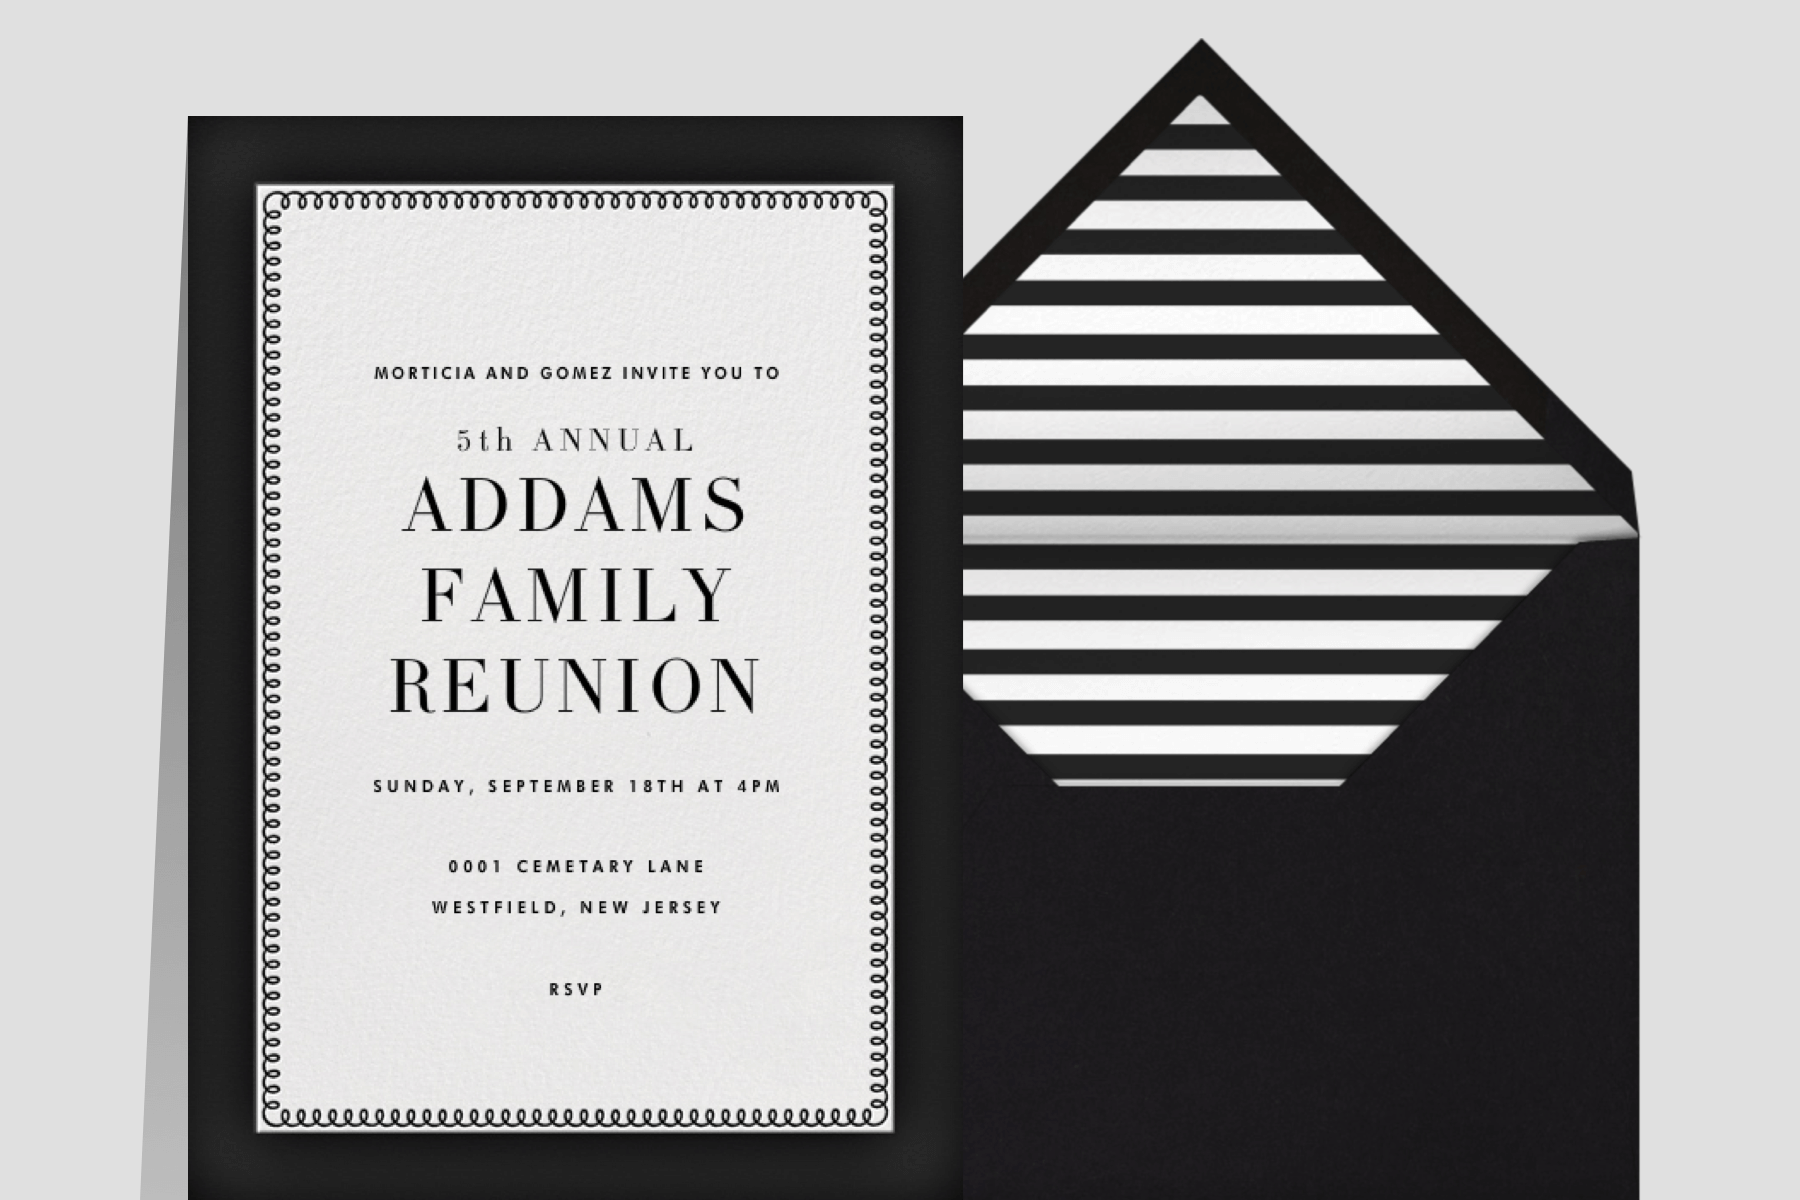 A white invitation with a black border and text. 